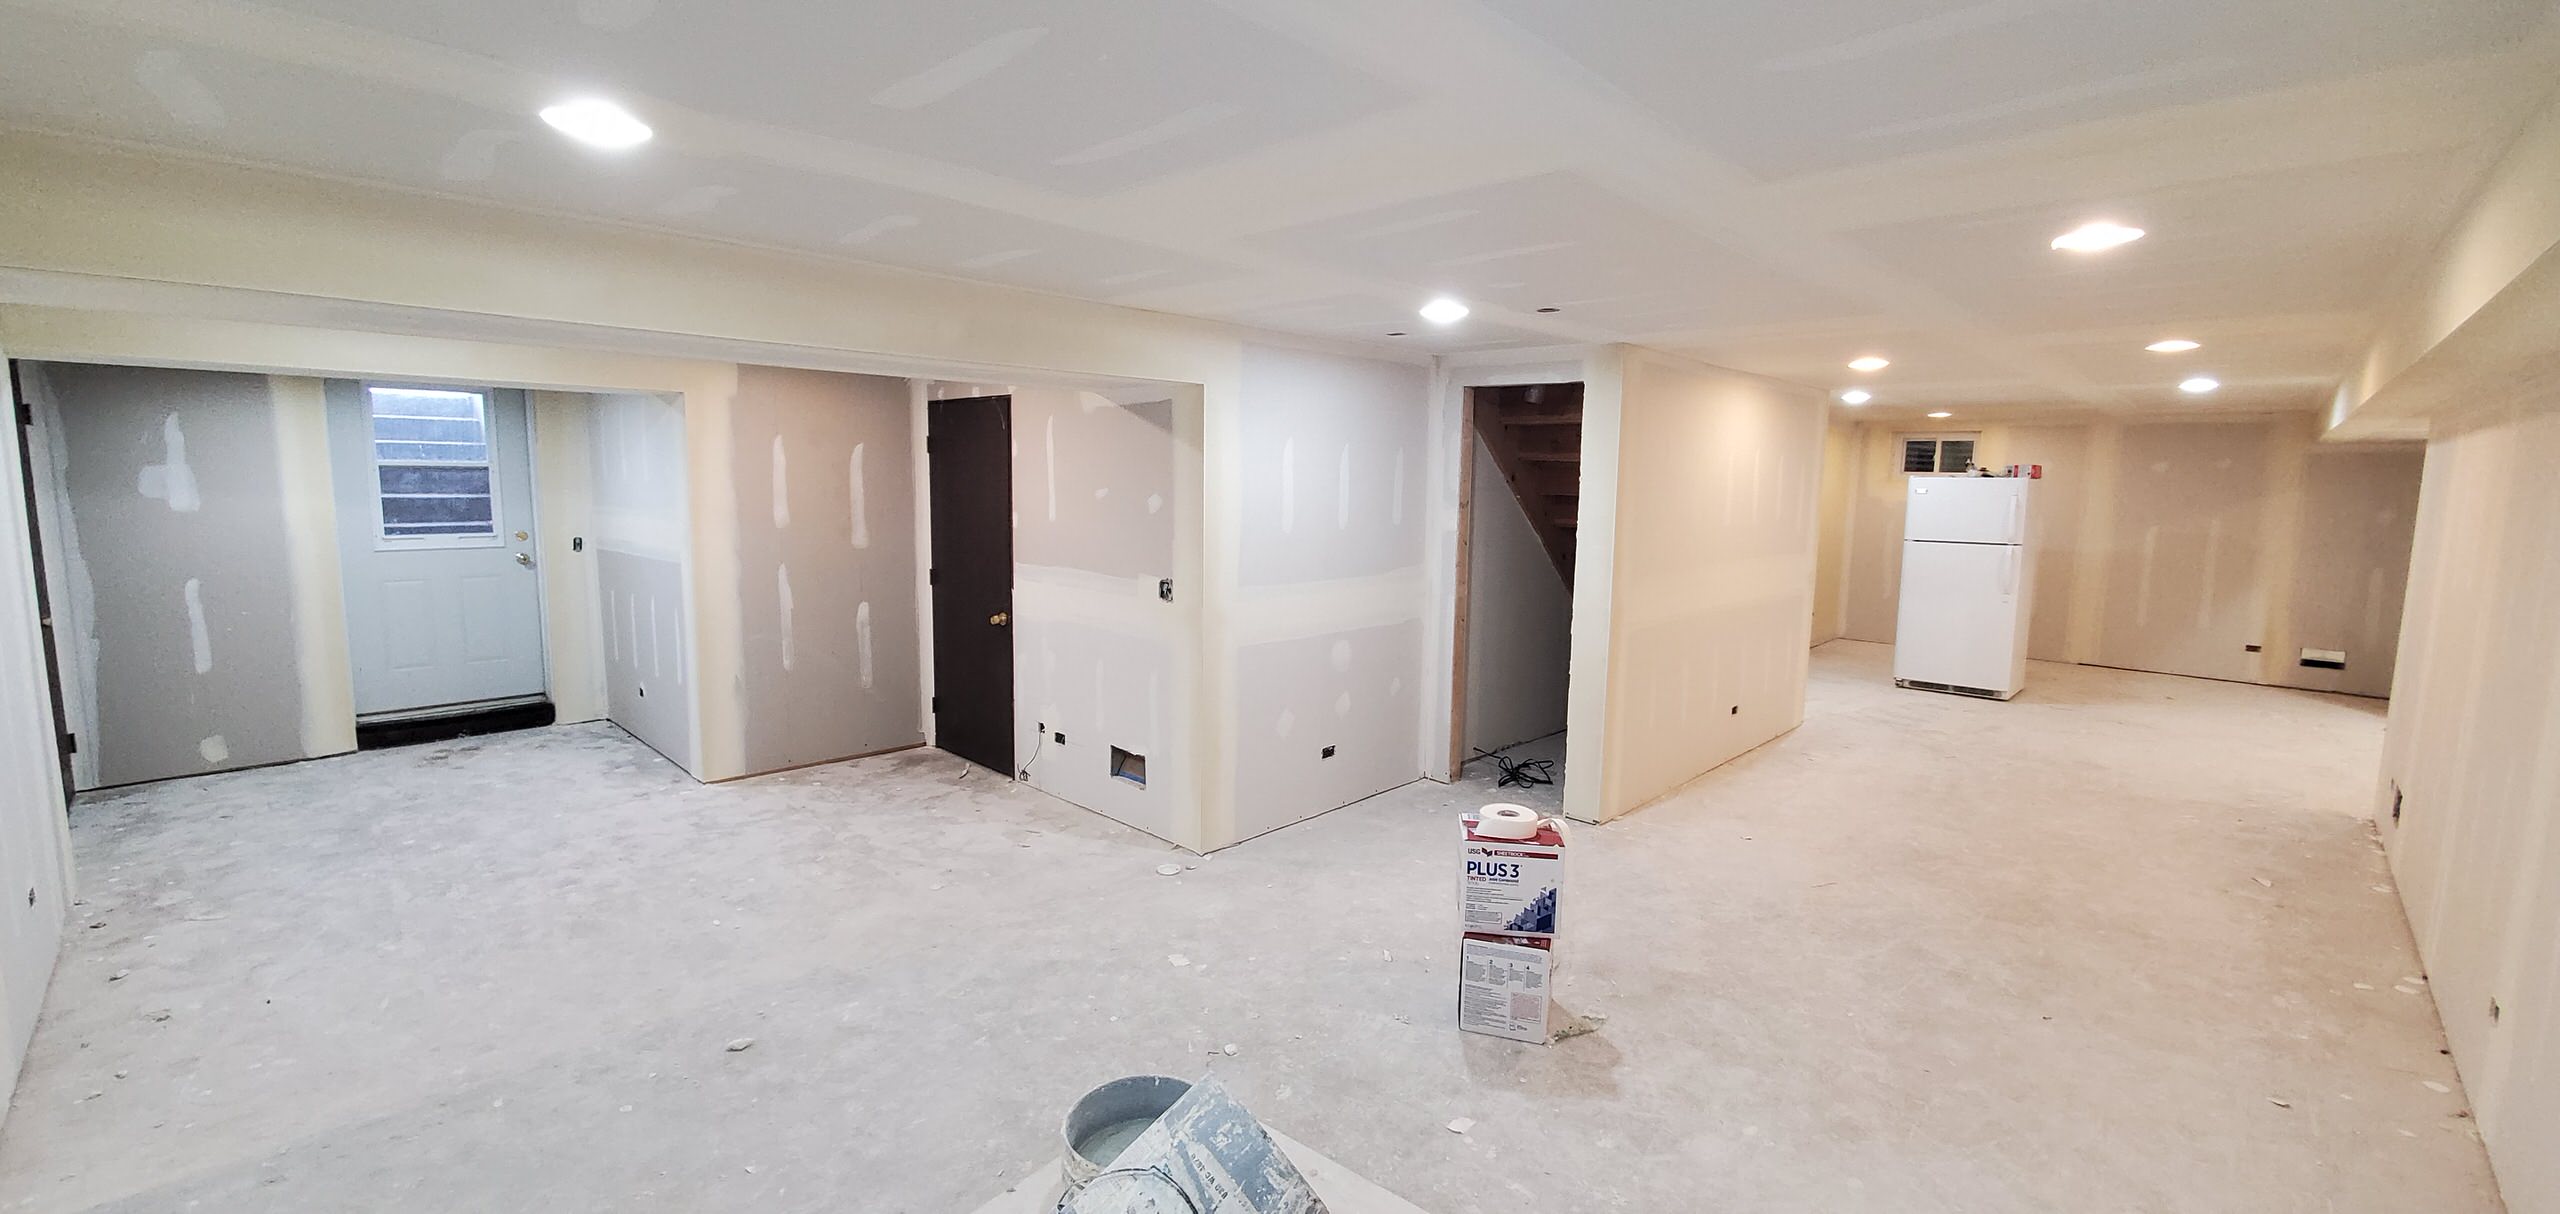 Remodeled finished basement in progress Antioch, IL